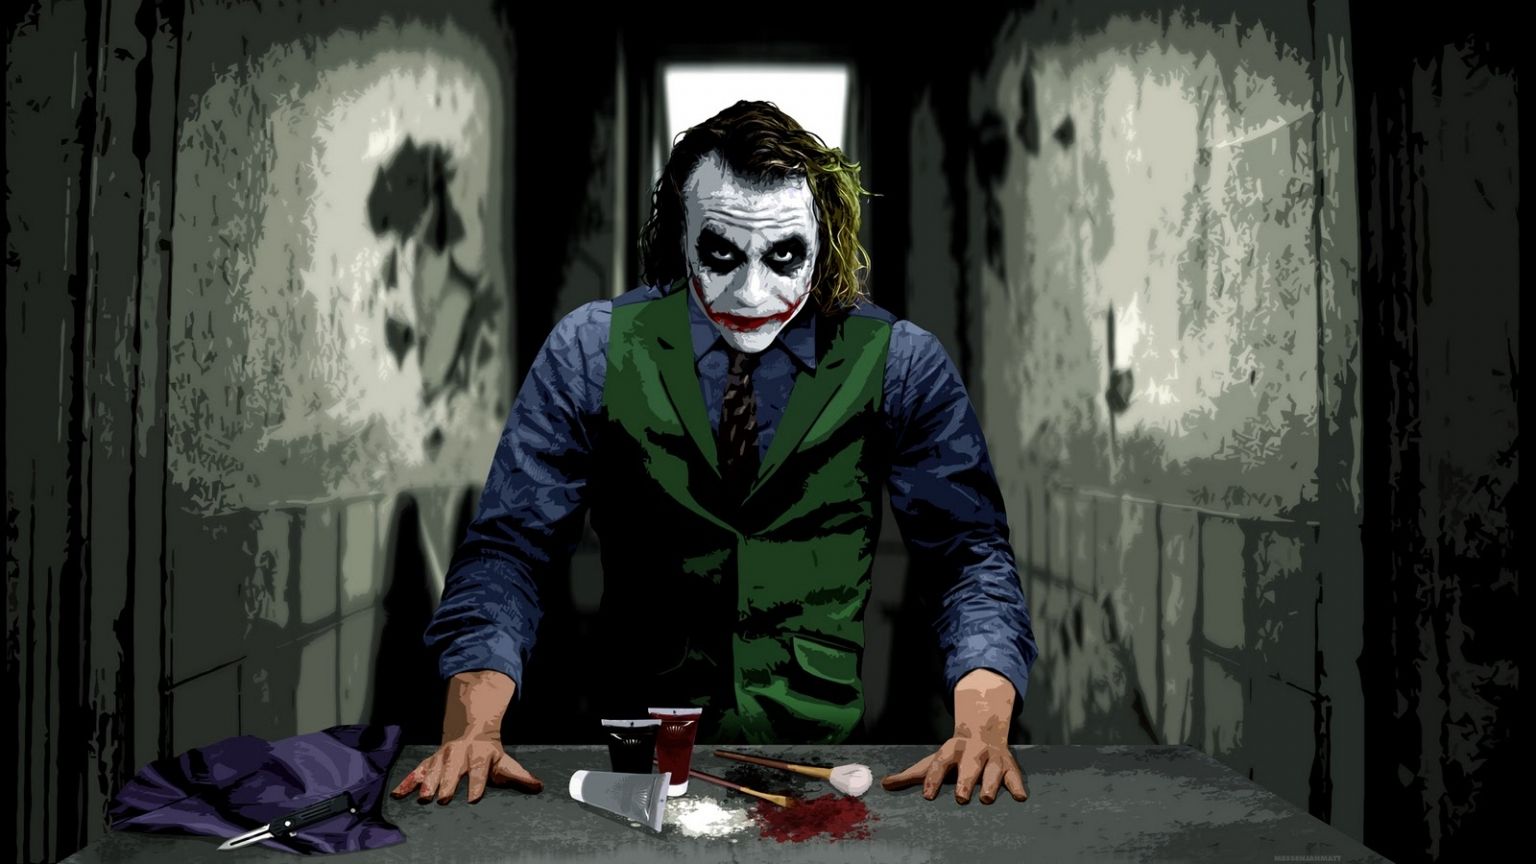 Free download Wallpaper a day joker do you want to see a magic